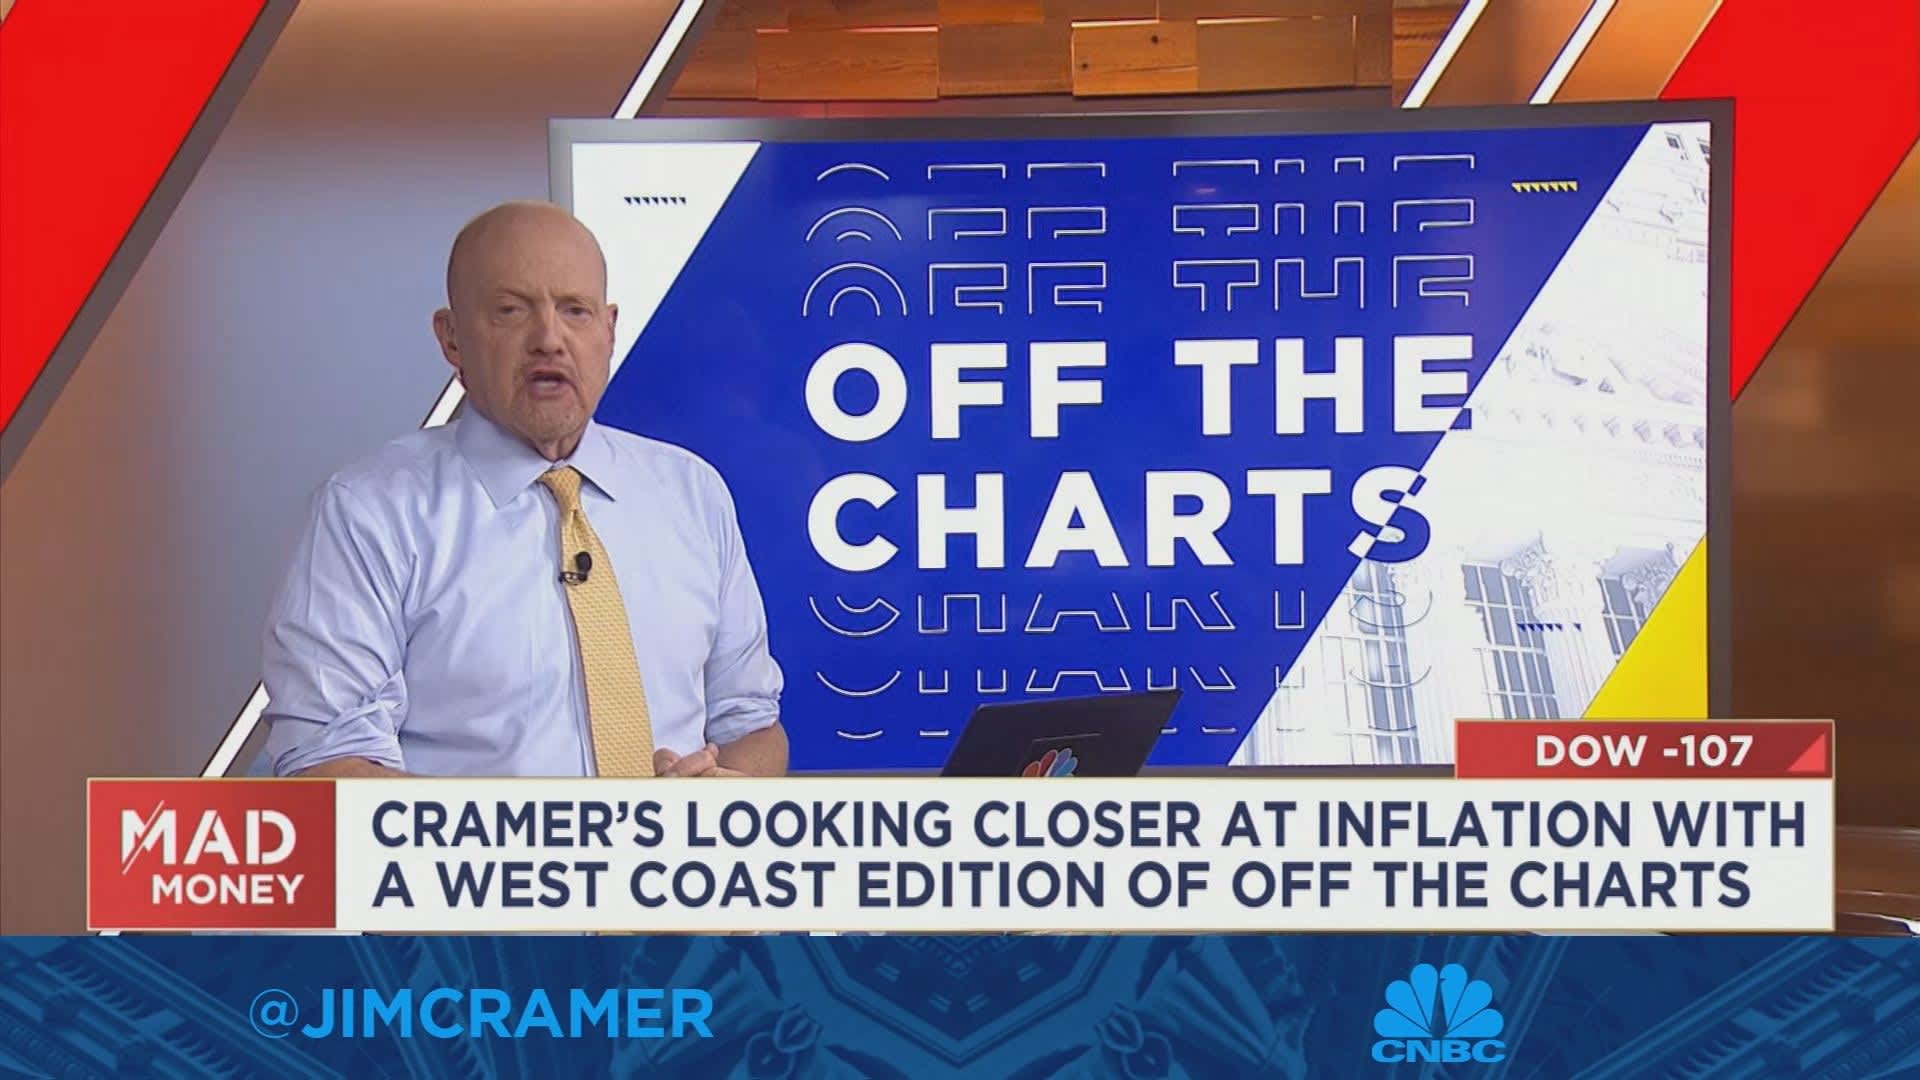 Charts suggest inflation could soon come down 'substantially,' Jim Cramer says